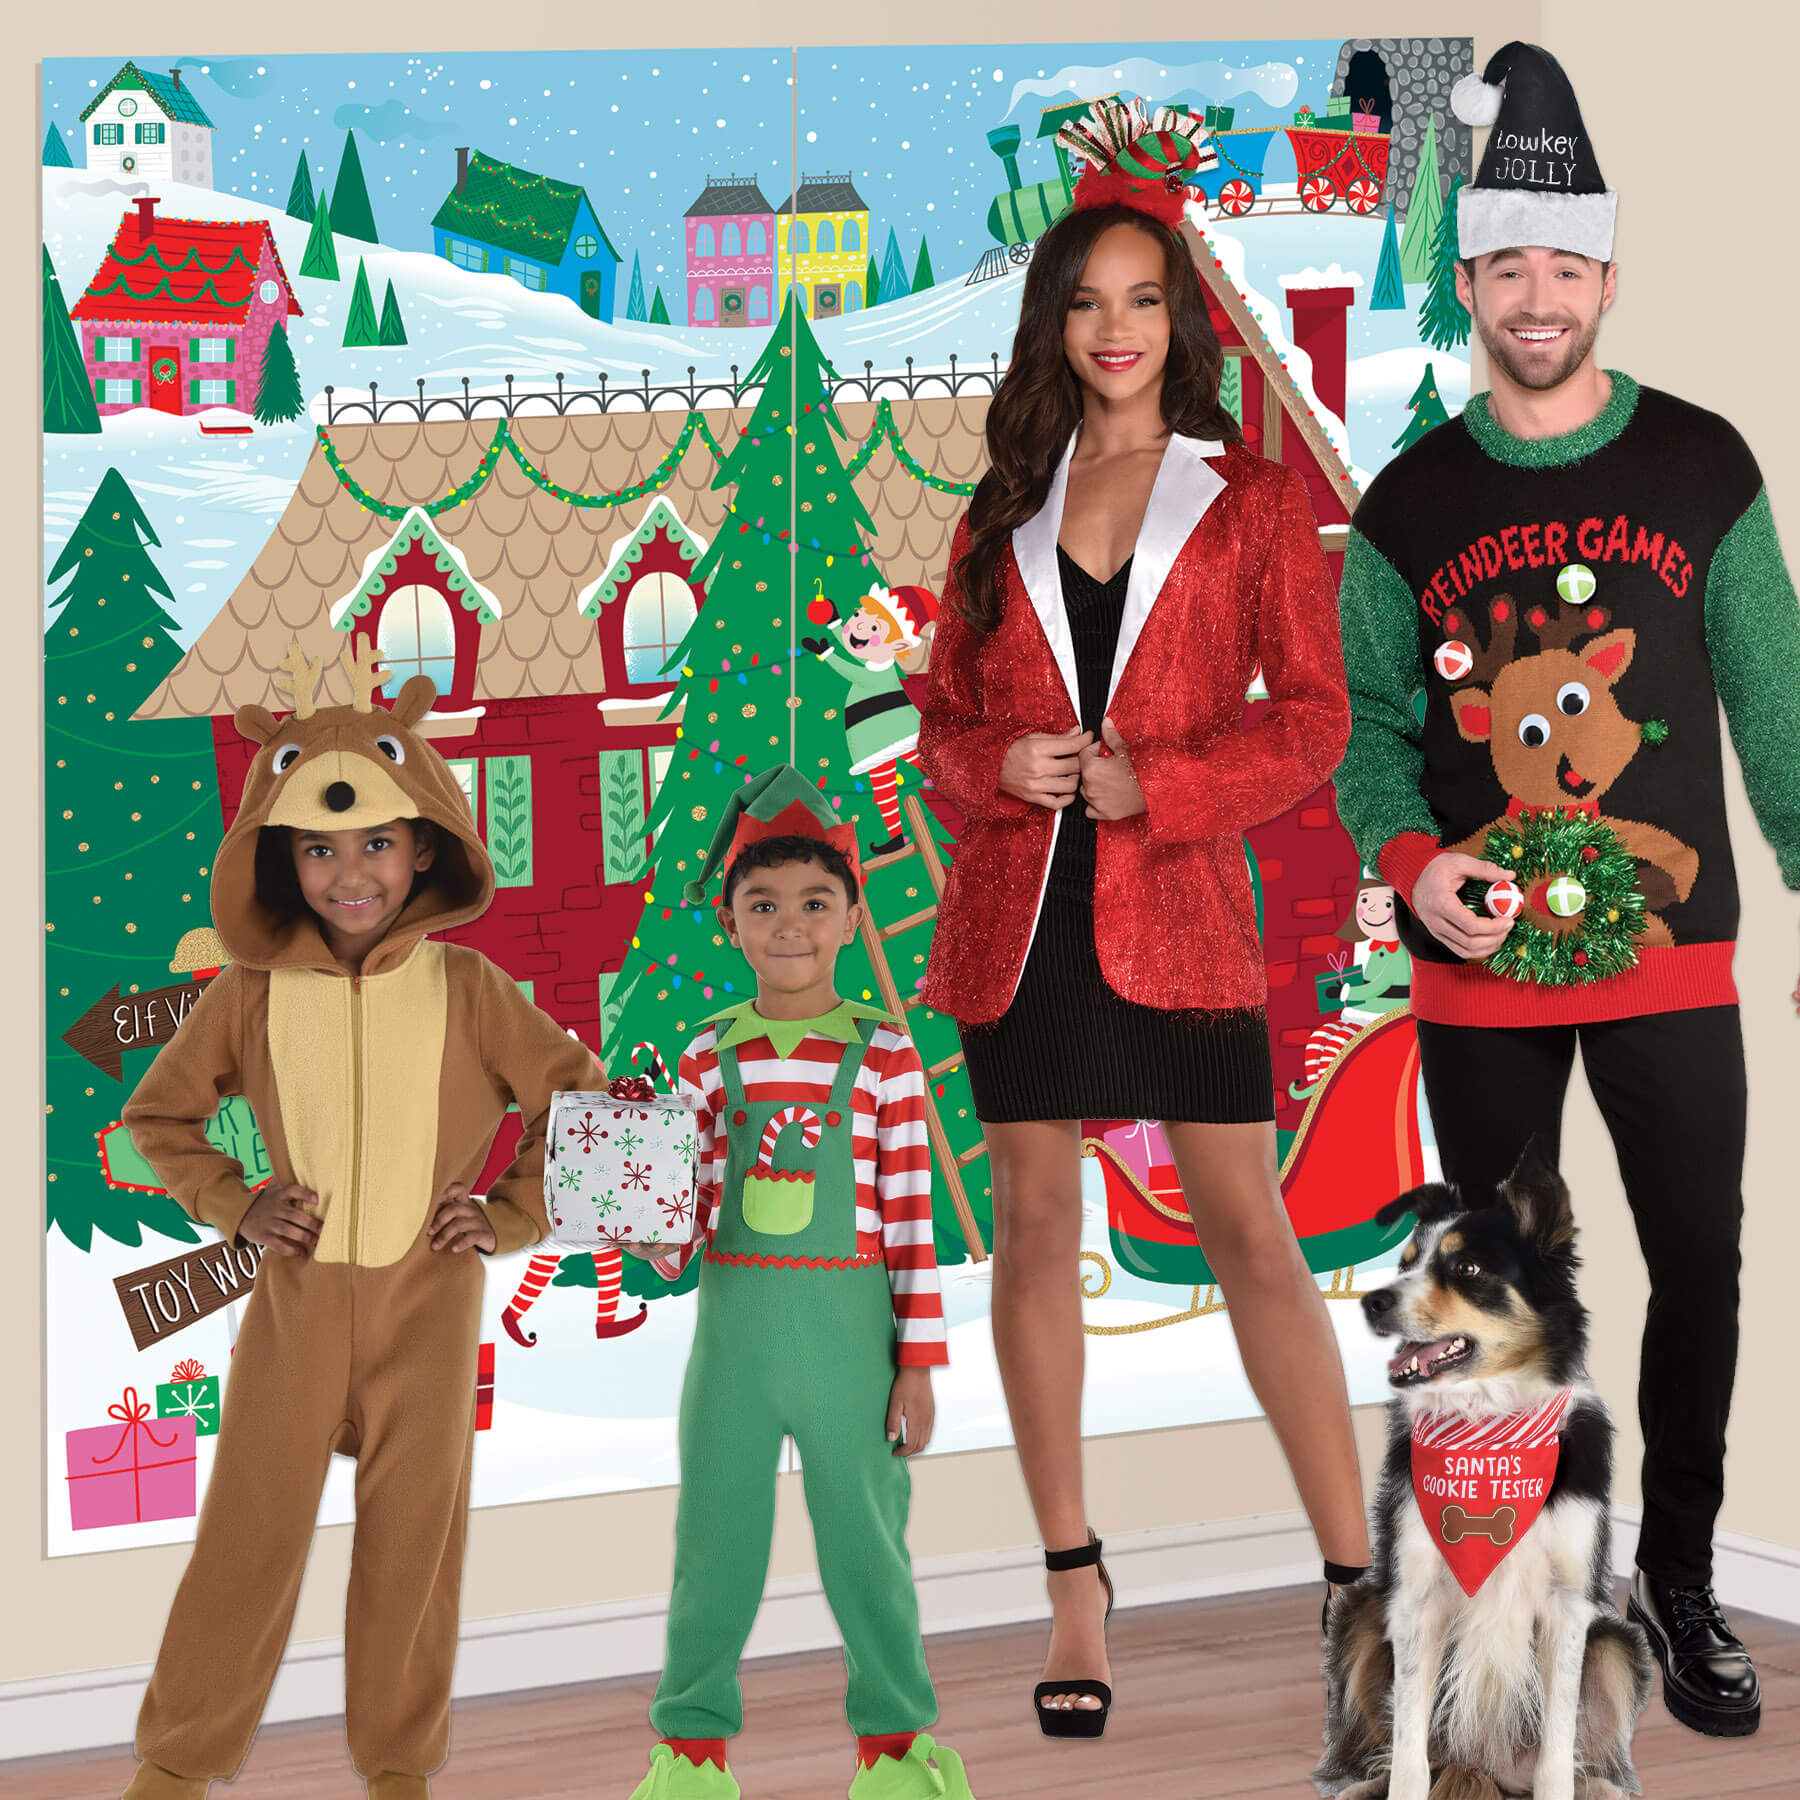 christmas costumes and wearables, elf, reindeer games, bear